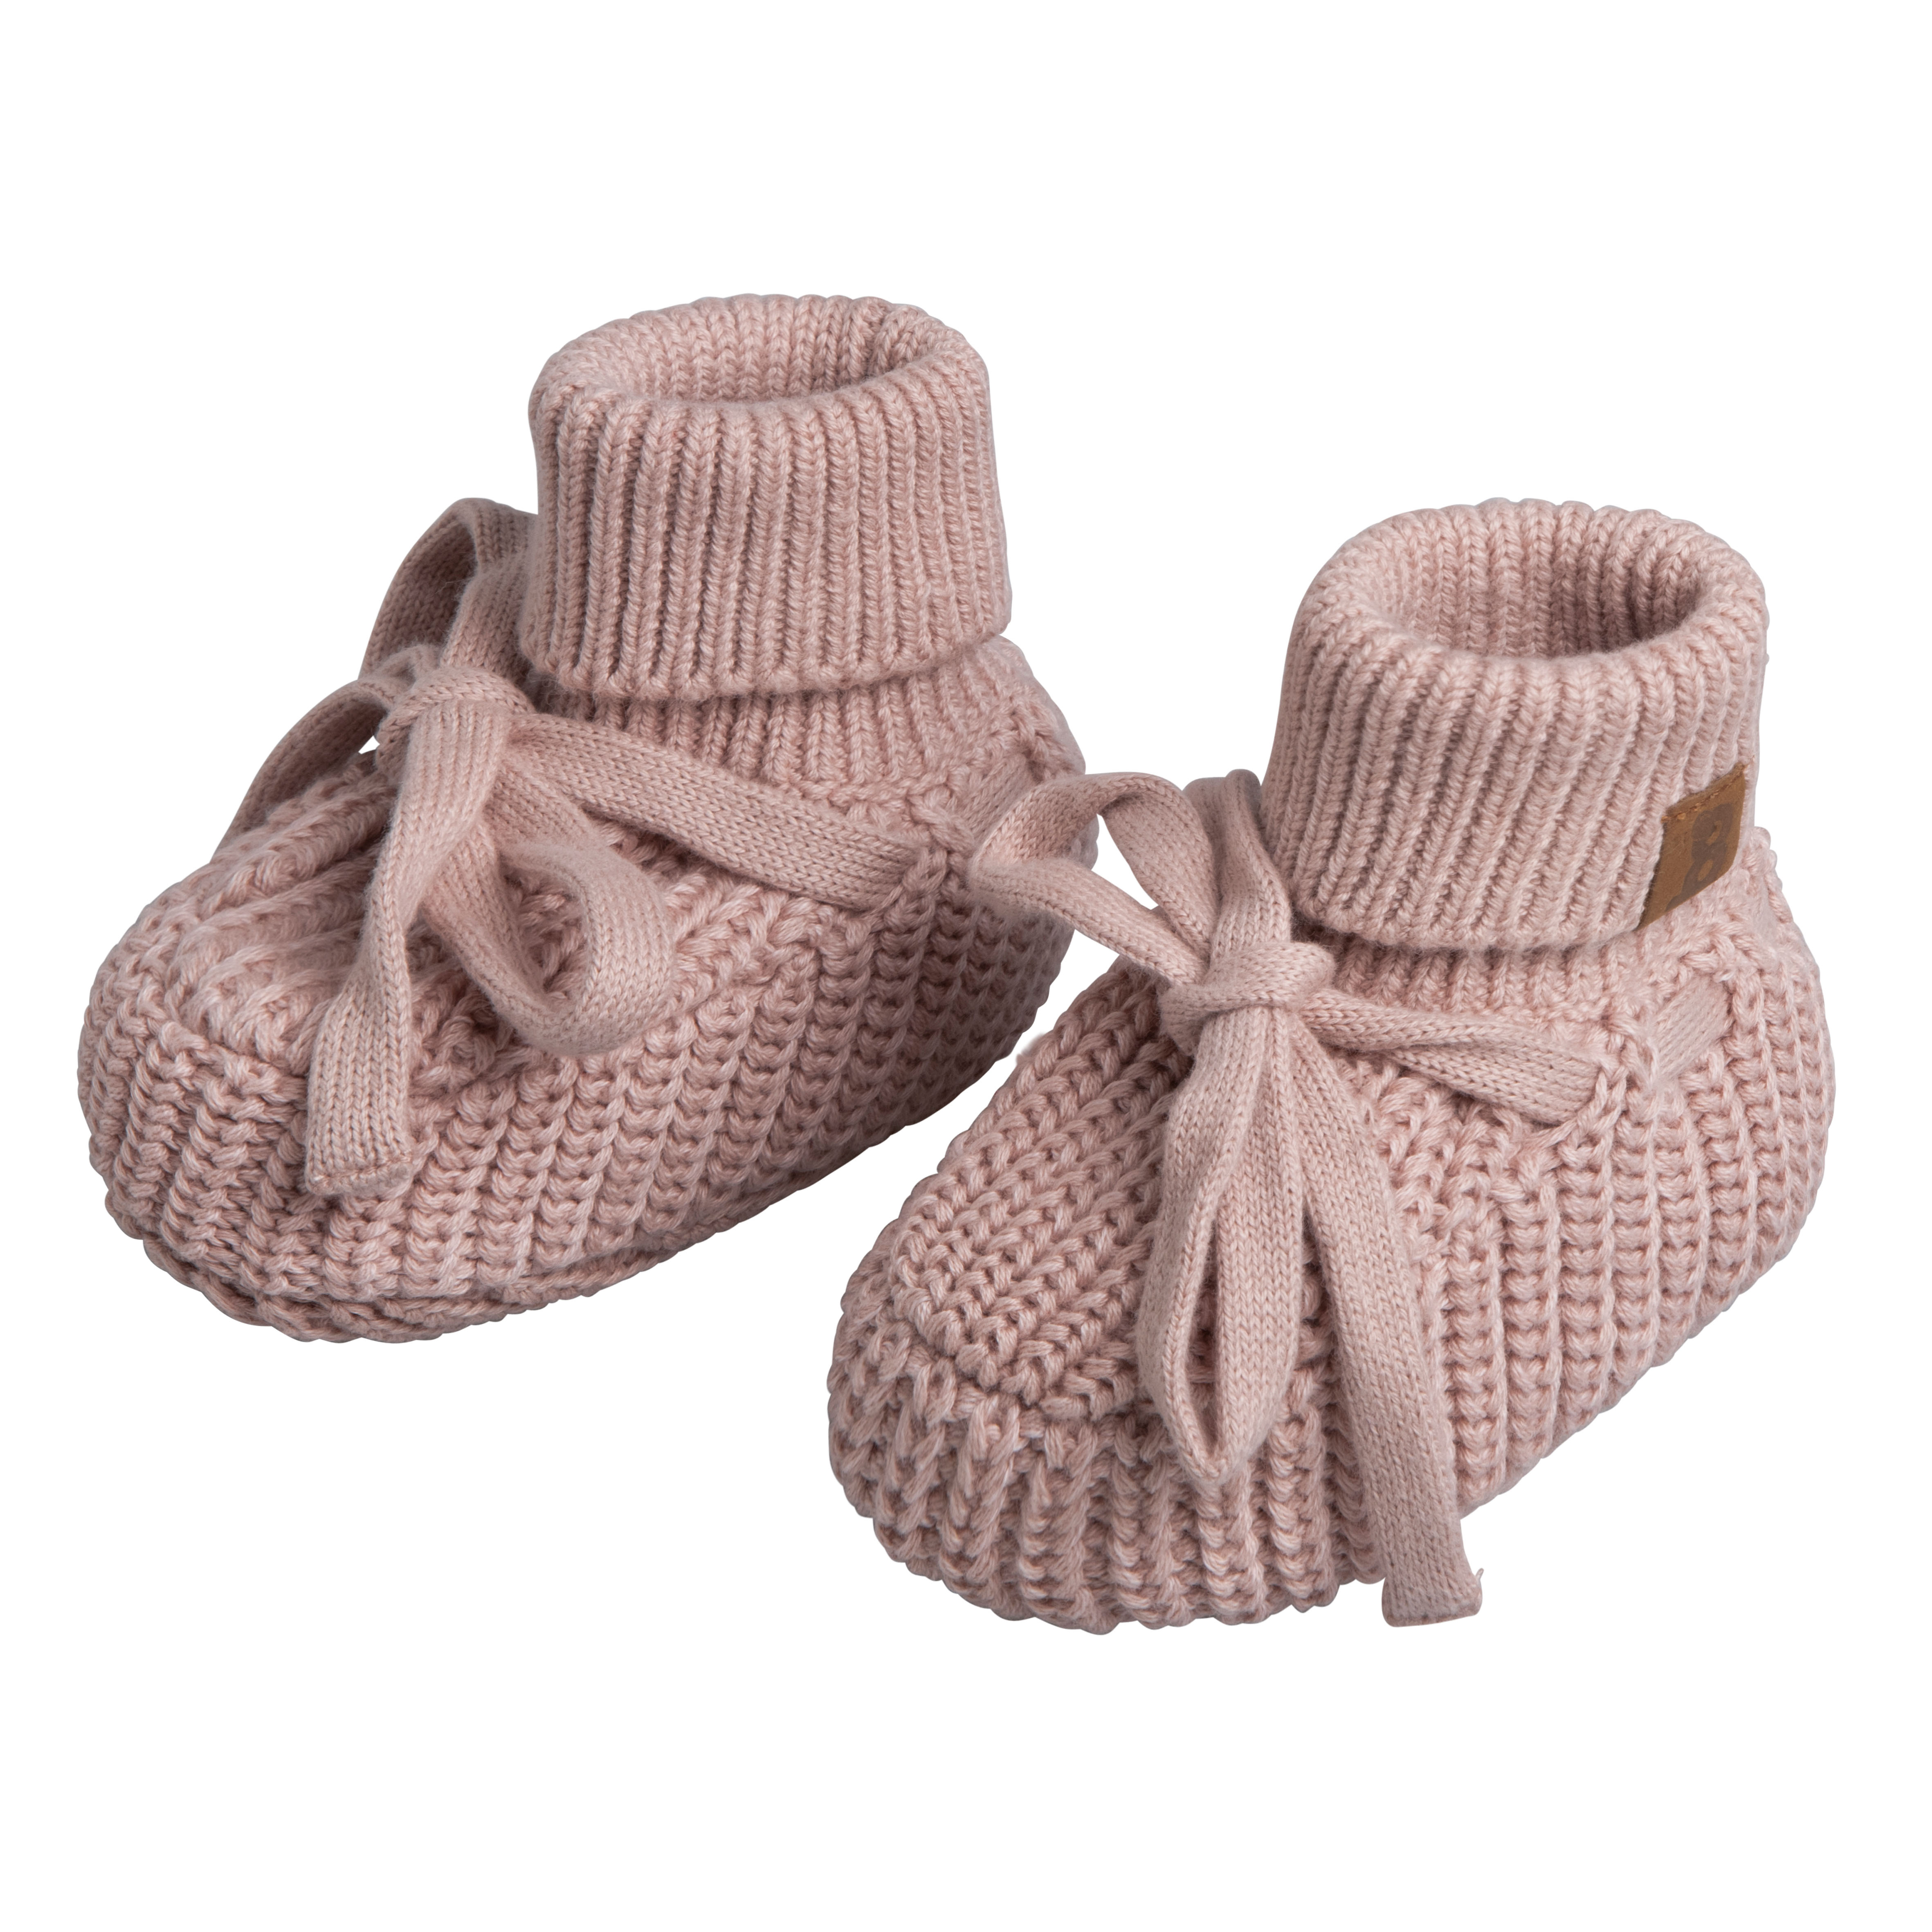 Chaussons teddy Soul vieux rose - 3-6 mois